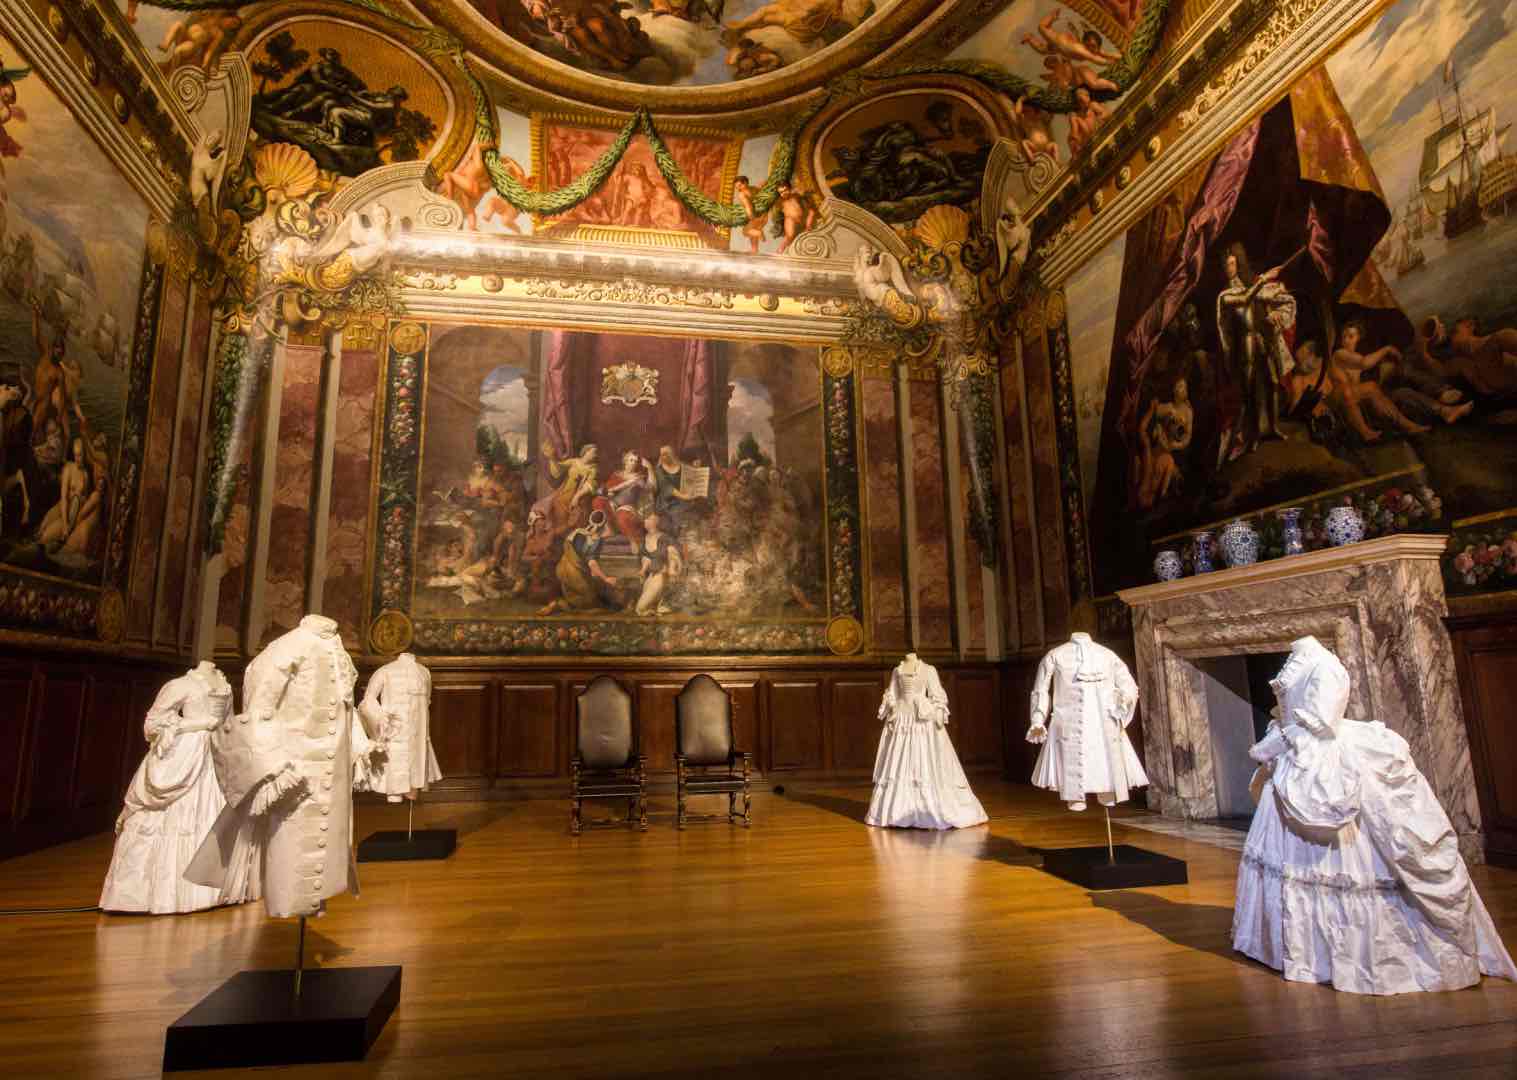 The Queens room at hampton Court Palace